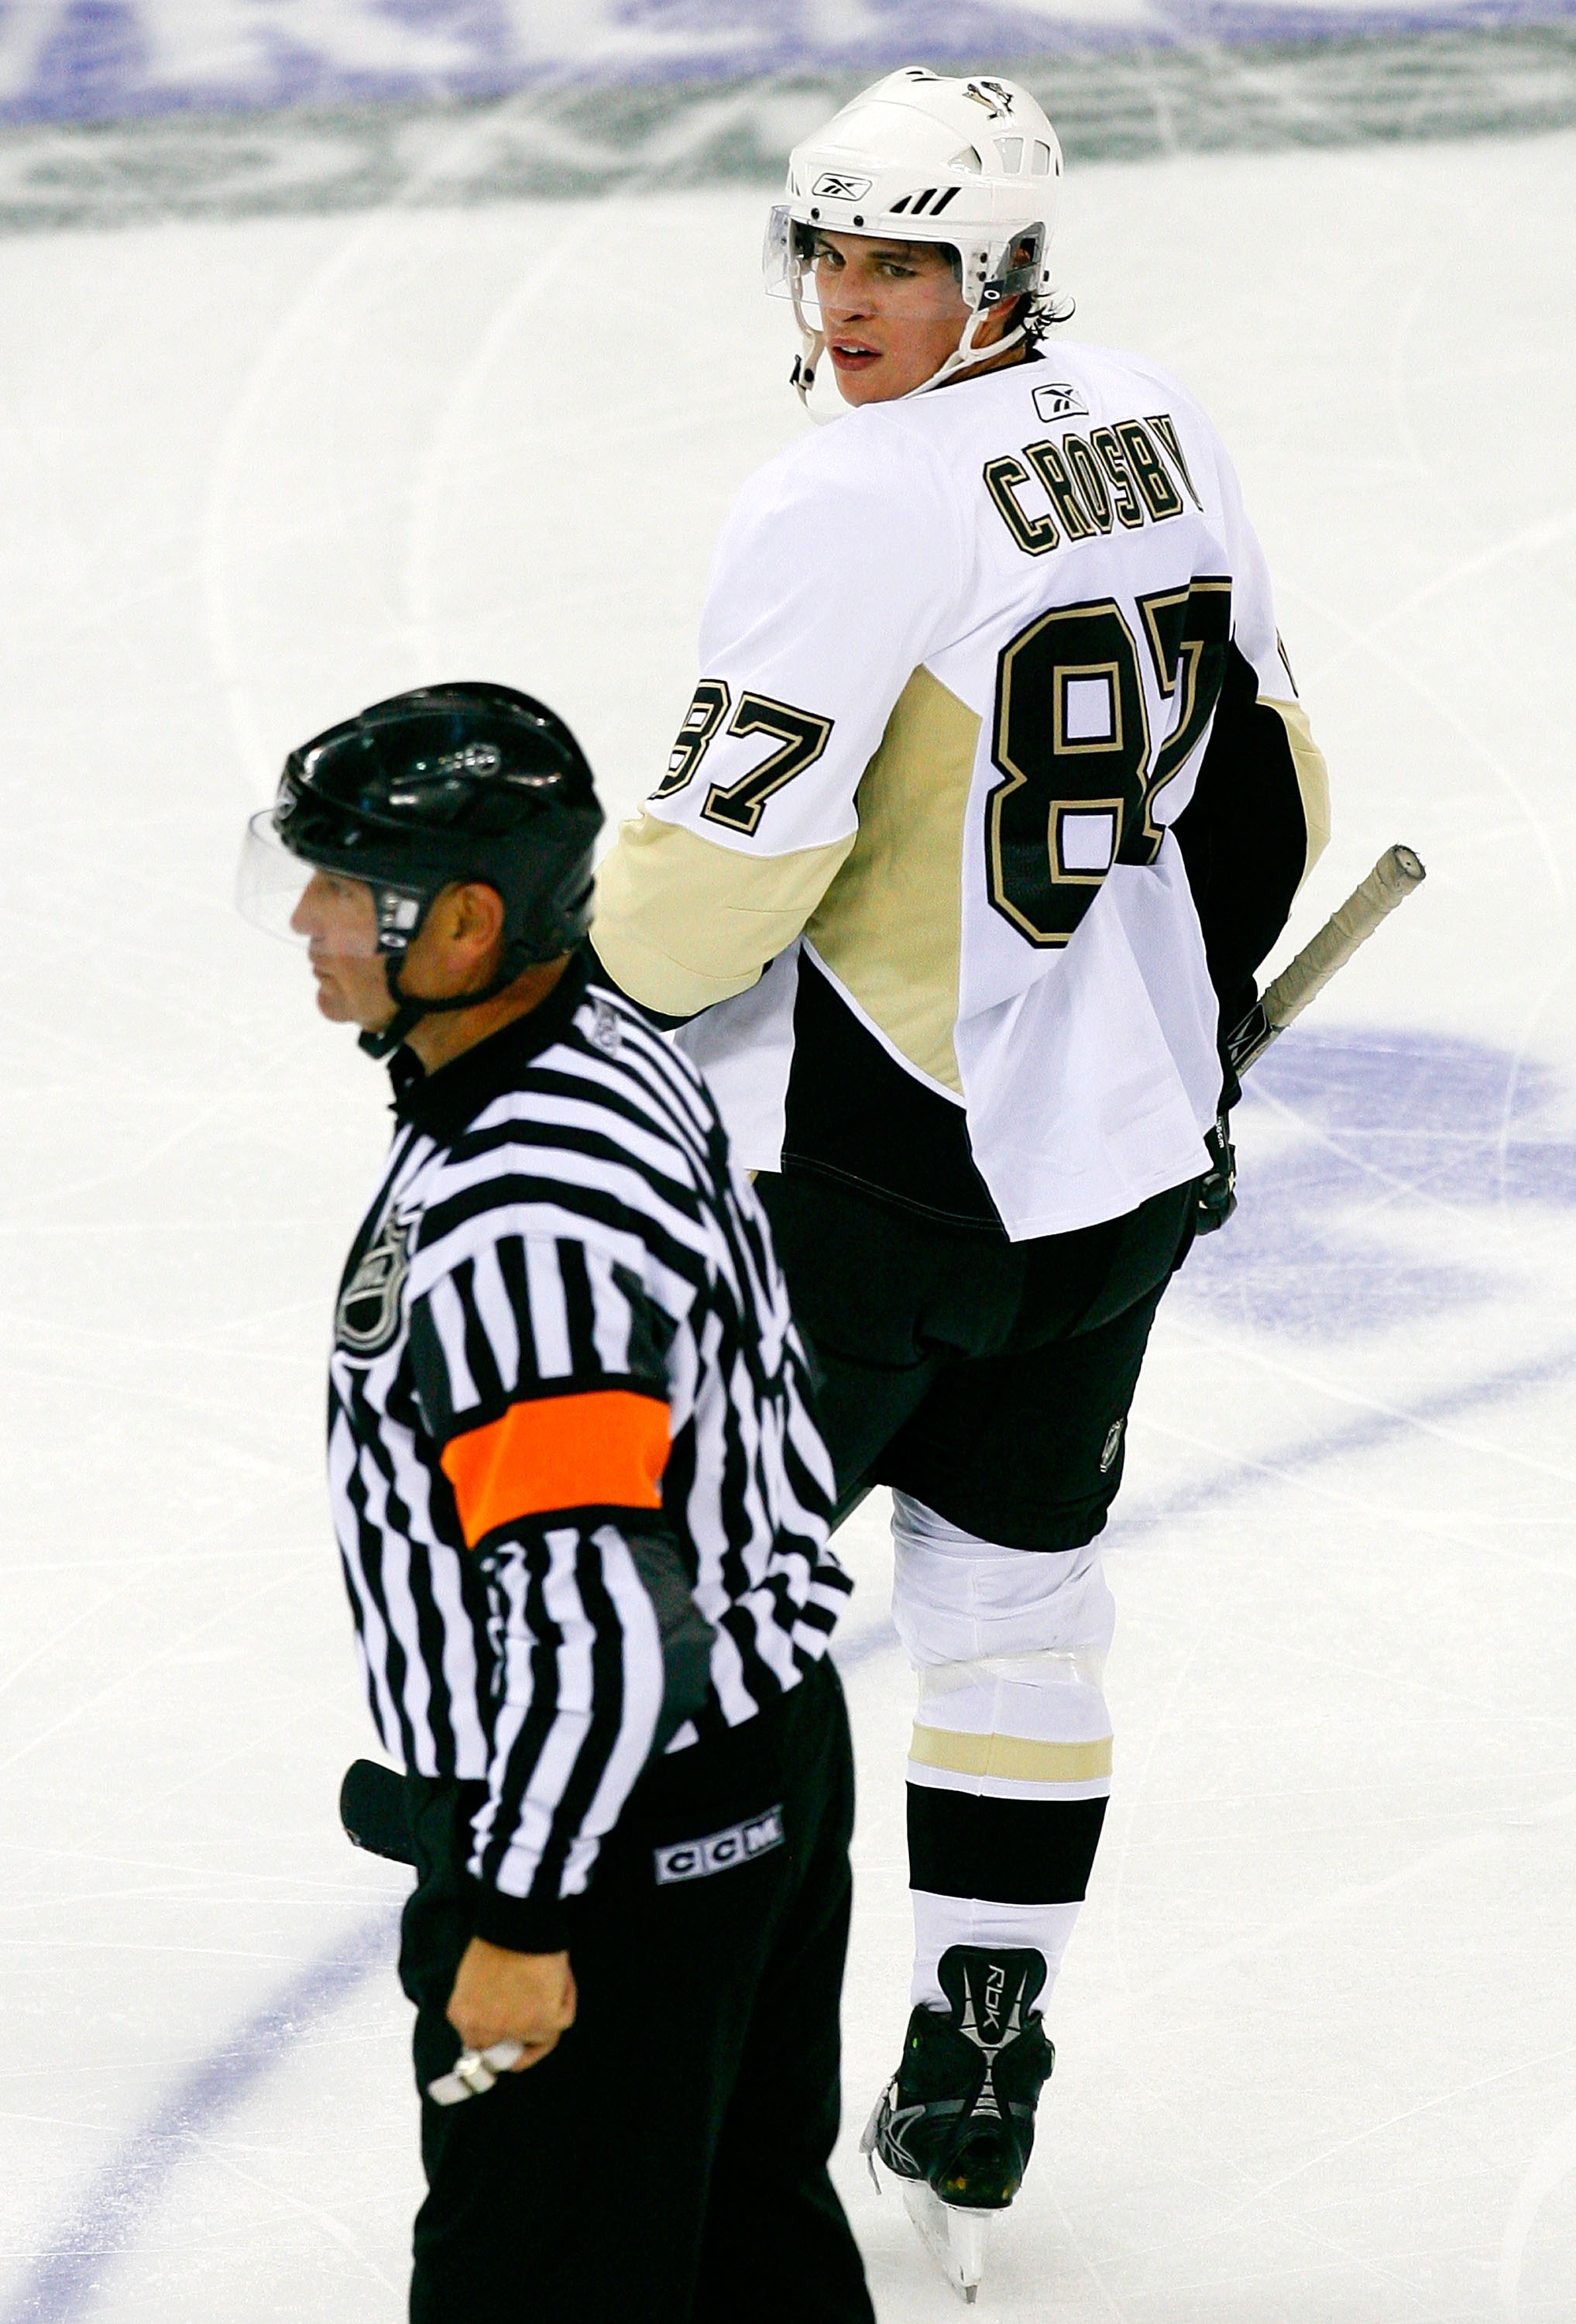 A Familiar Position for Sid - Complaining to the officials.